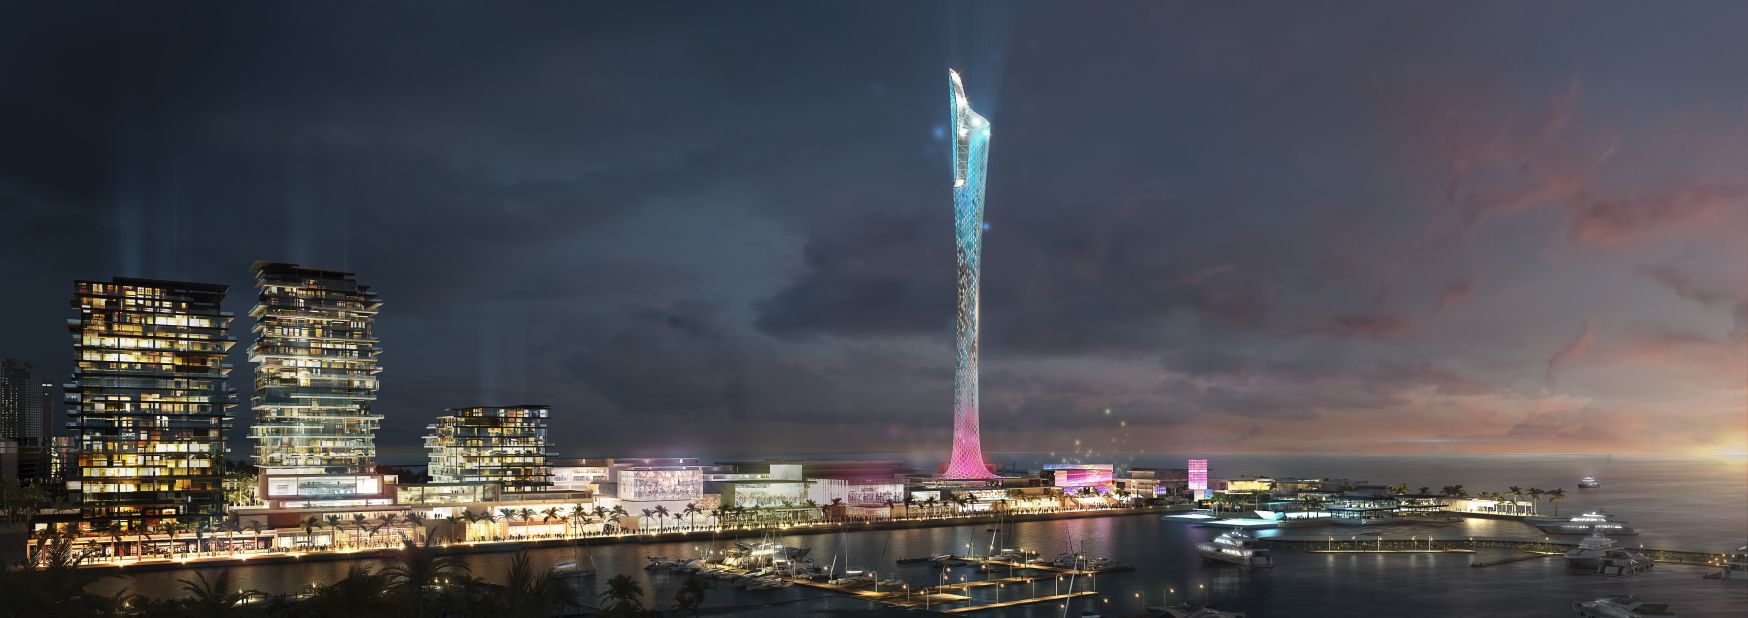 The tower's design was modeled on the ascent of Mount Everest and includes "base camps" at different levels, says Chris Jones, partner at the firm. The tower would feature multiple jumping platforms, with the peak reserved for professionals only.